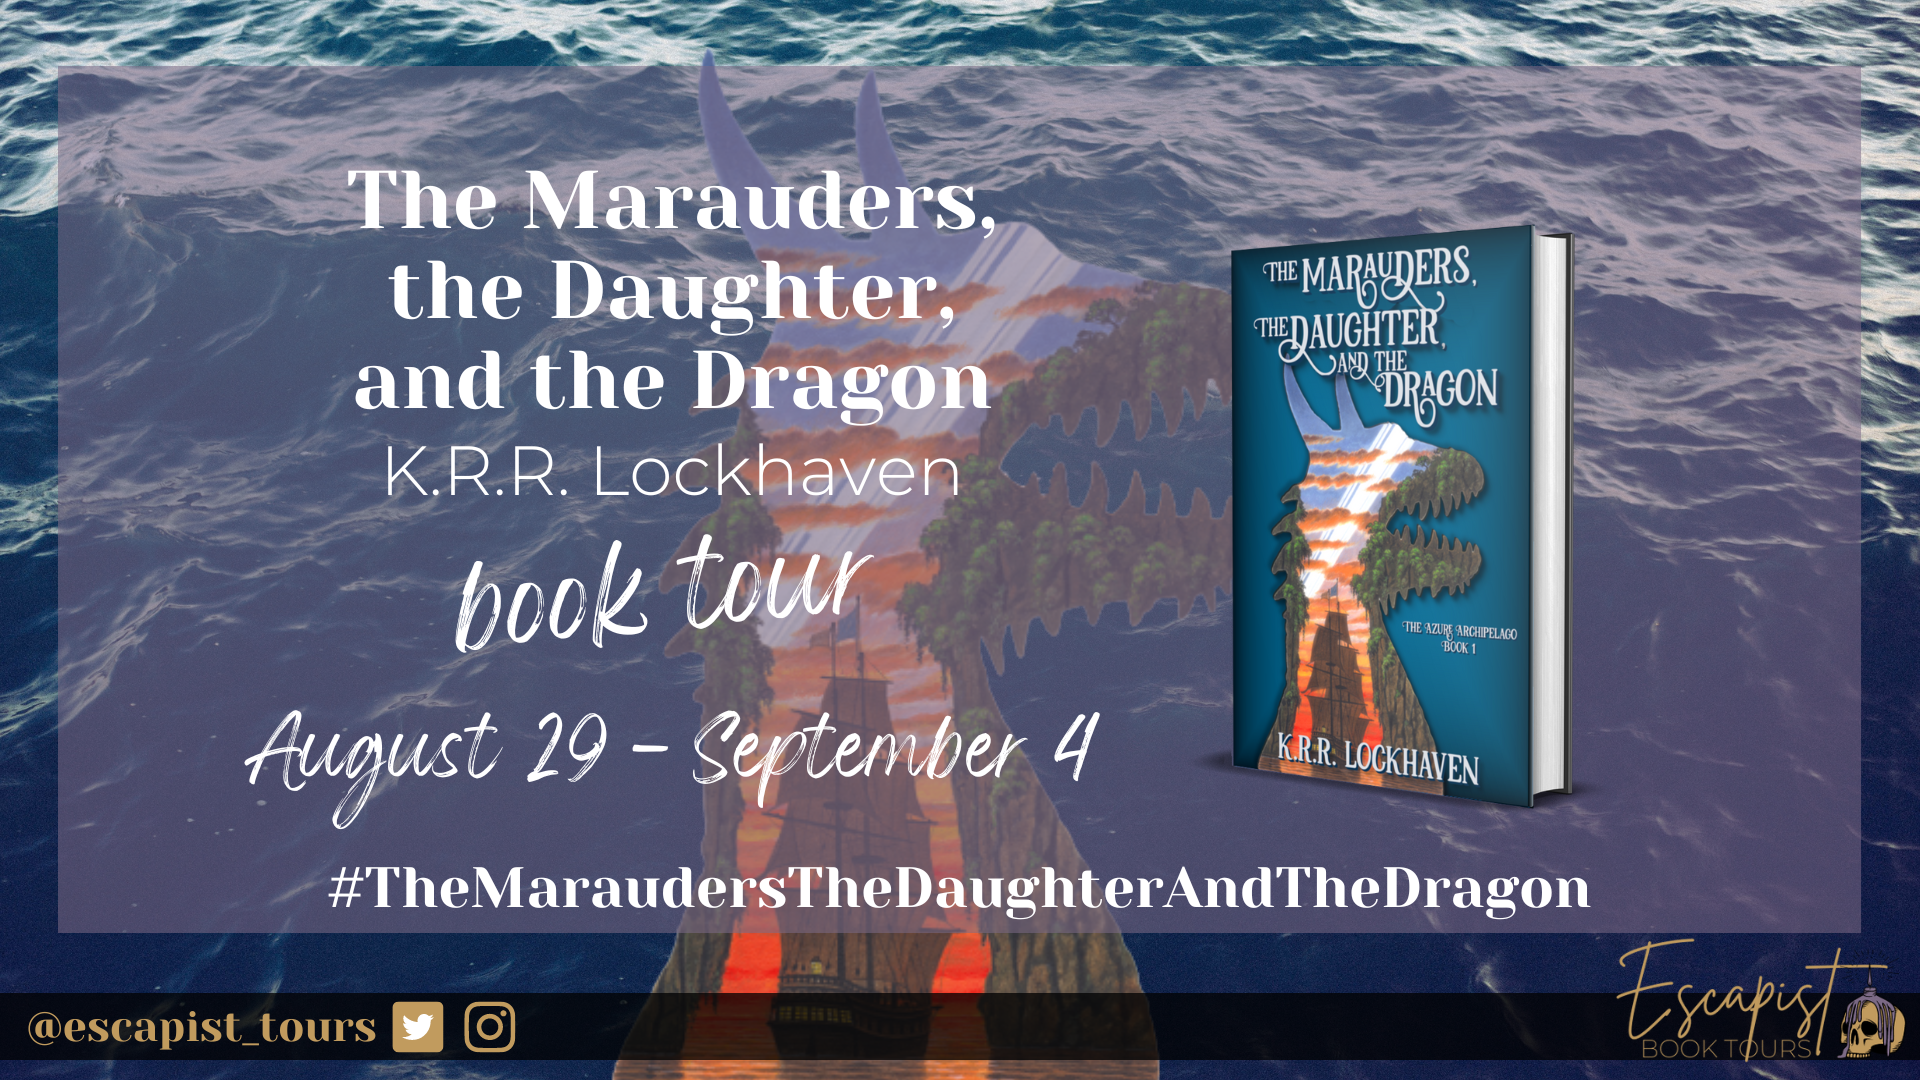 The Marauders, the Daughter, and the Dragon blog announcement